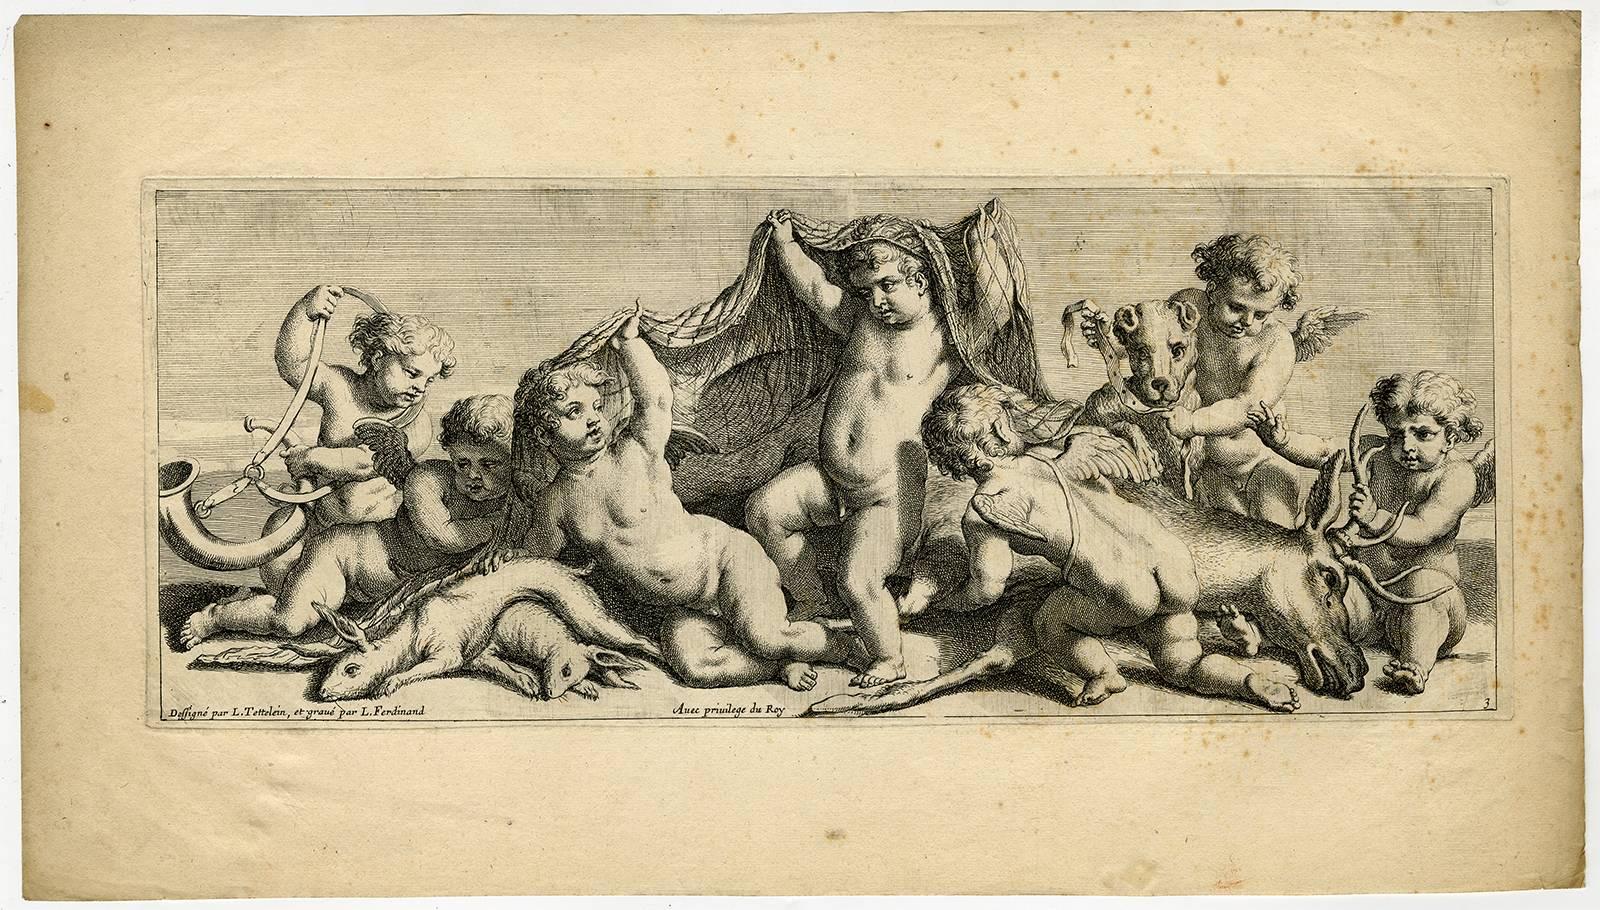  Louis Elle (Ferdinand) Figurative Print - Untitled - Ornamental frieze with putti with hunting attributes.